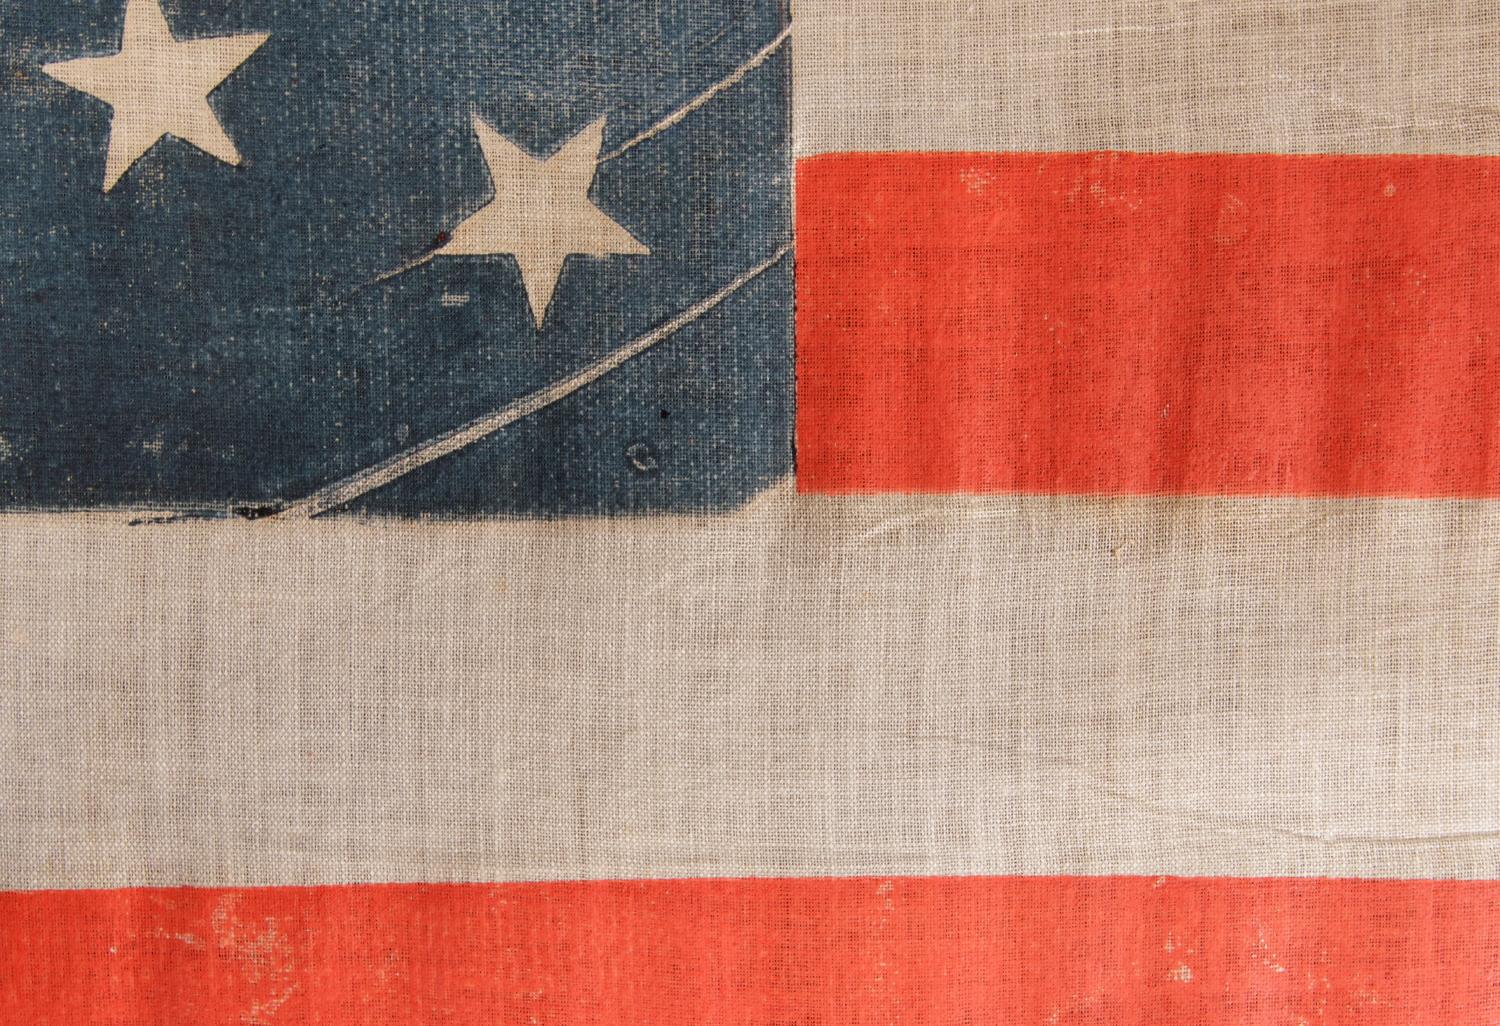 19th Century 38 Stars in a Medallion Configuration, on a Large Scale Antique American Flag